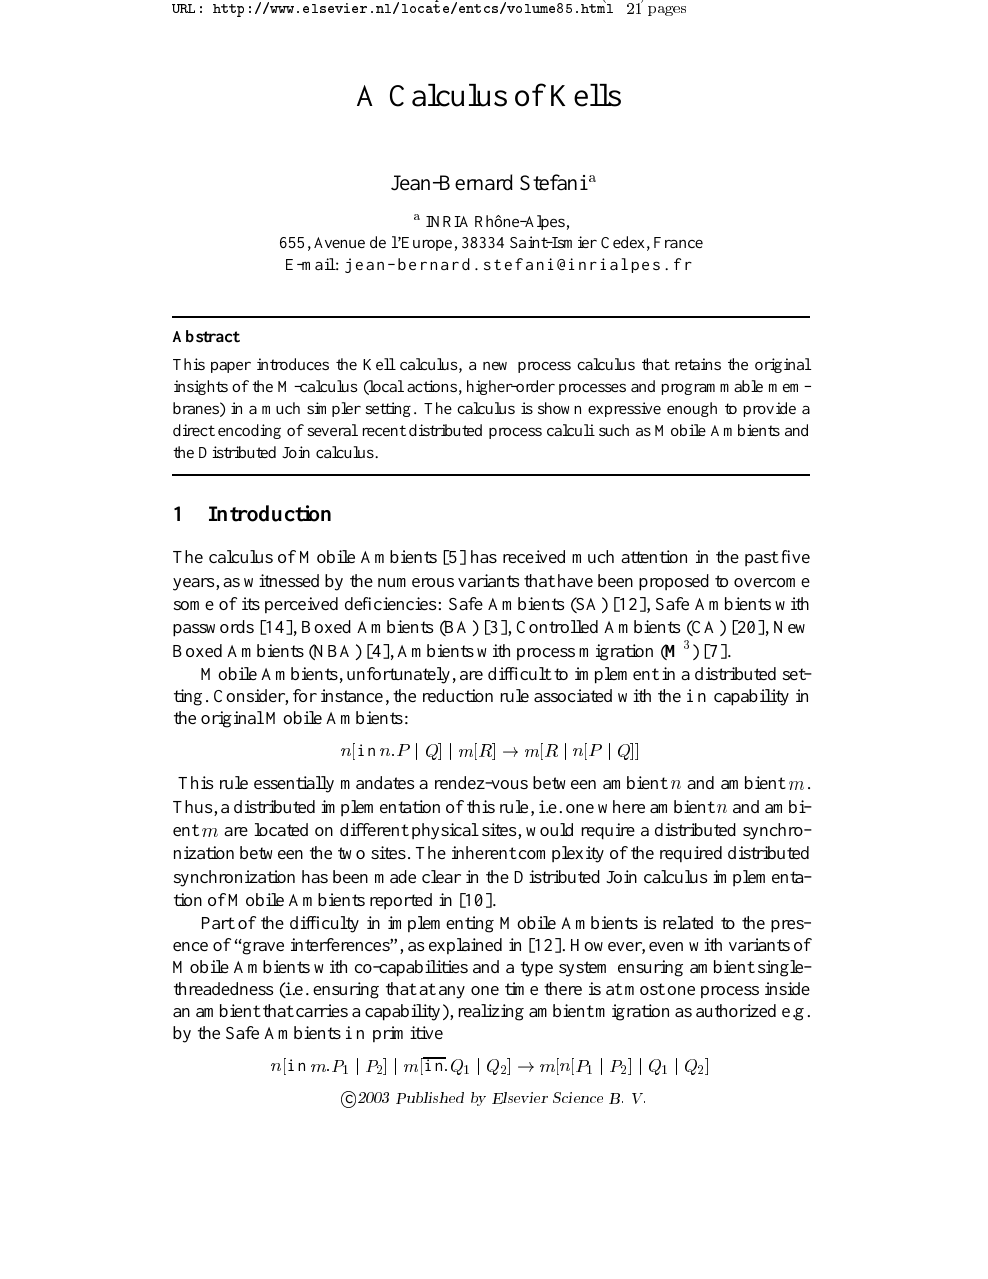 A Calculus Of Kells Topic Of Research Paper In Computer And Information Sciences Download Scholarly Article Pdf And Read For Free On Cyberleninka Open Science Hub